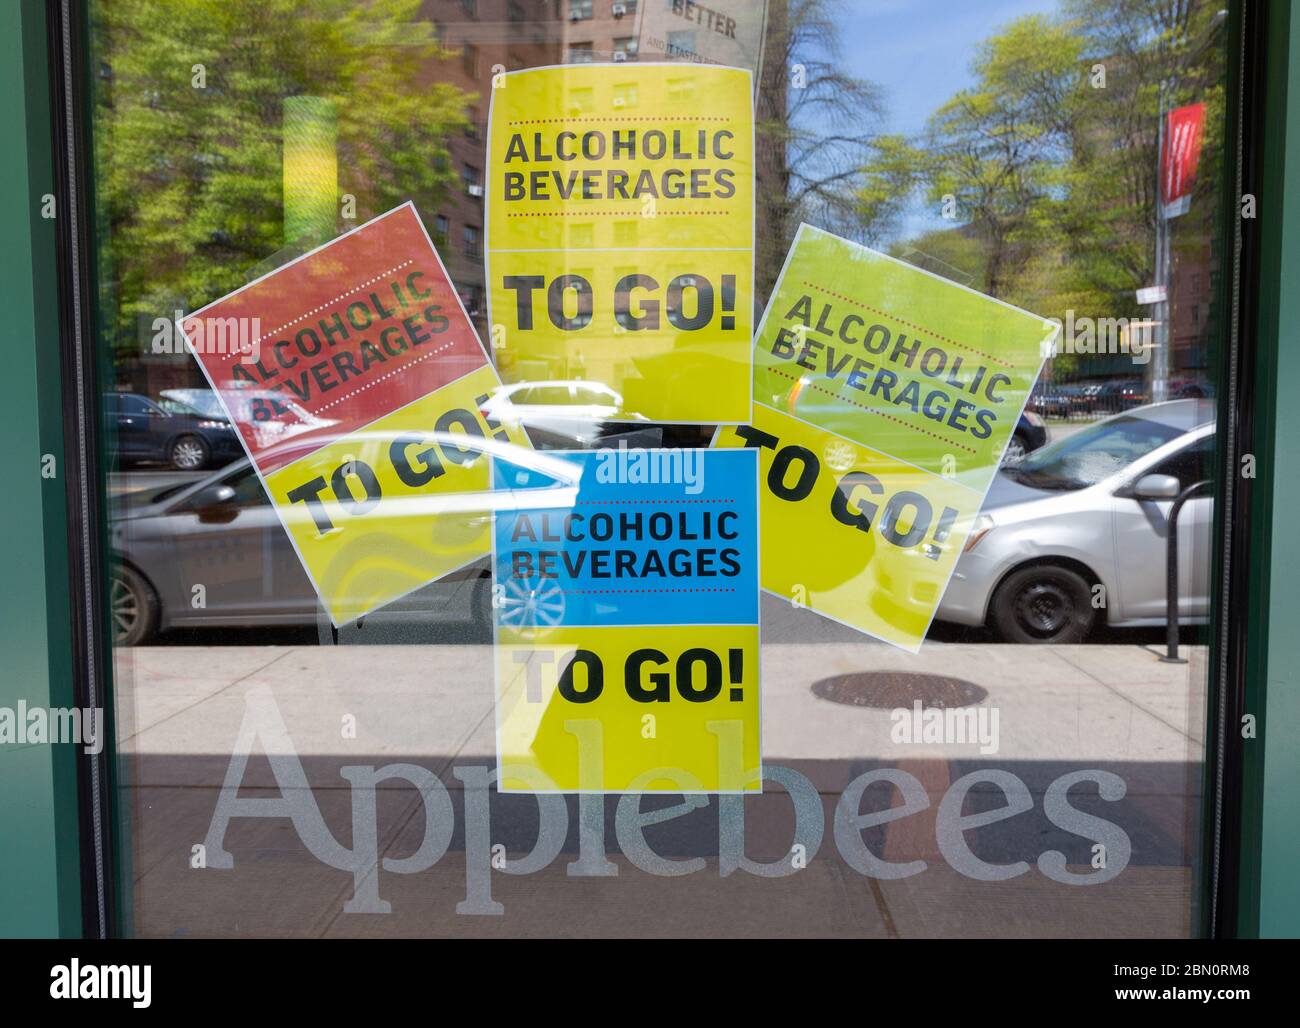 Applebees is aggressively advertising its alcoholic beverages to go with these multiple signs during the coronavirus or covid-19 pandemic Stock Photo